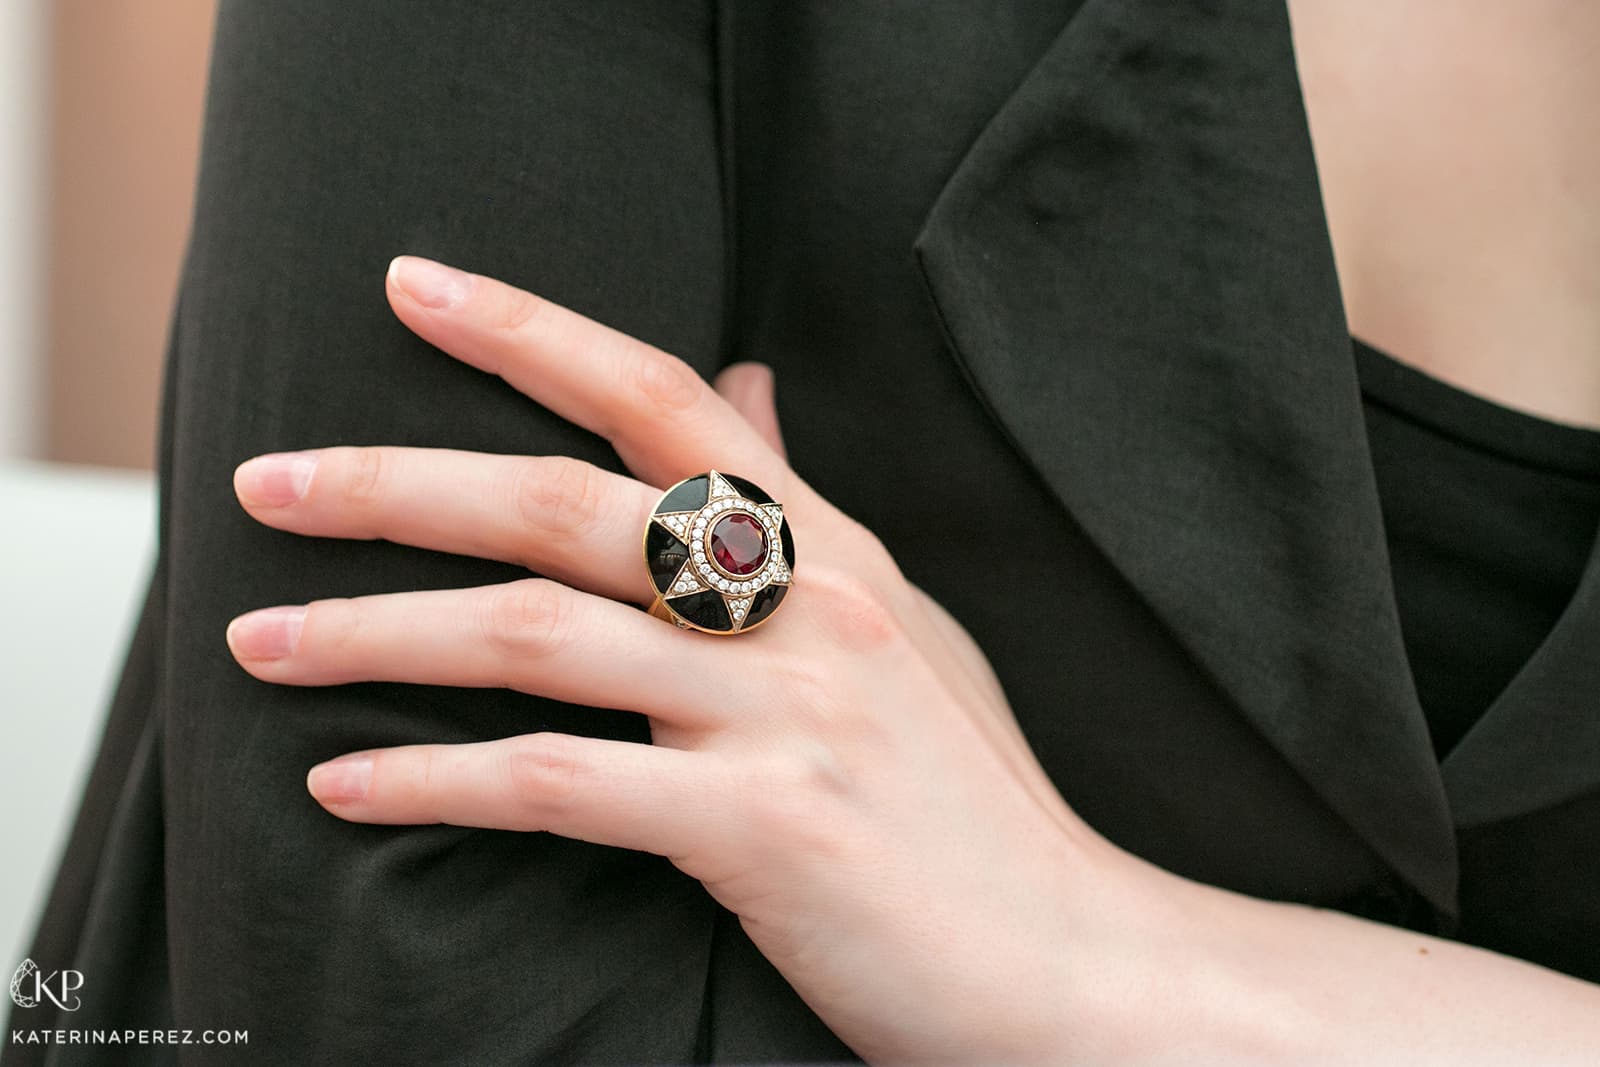 MiLiO 'Star' ring with a garnet and diamonds with black enamel over yellow gold